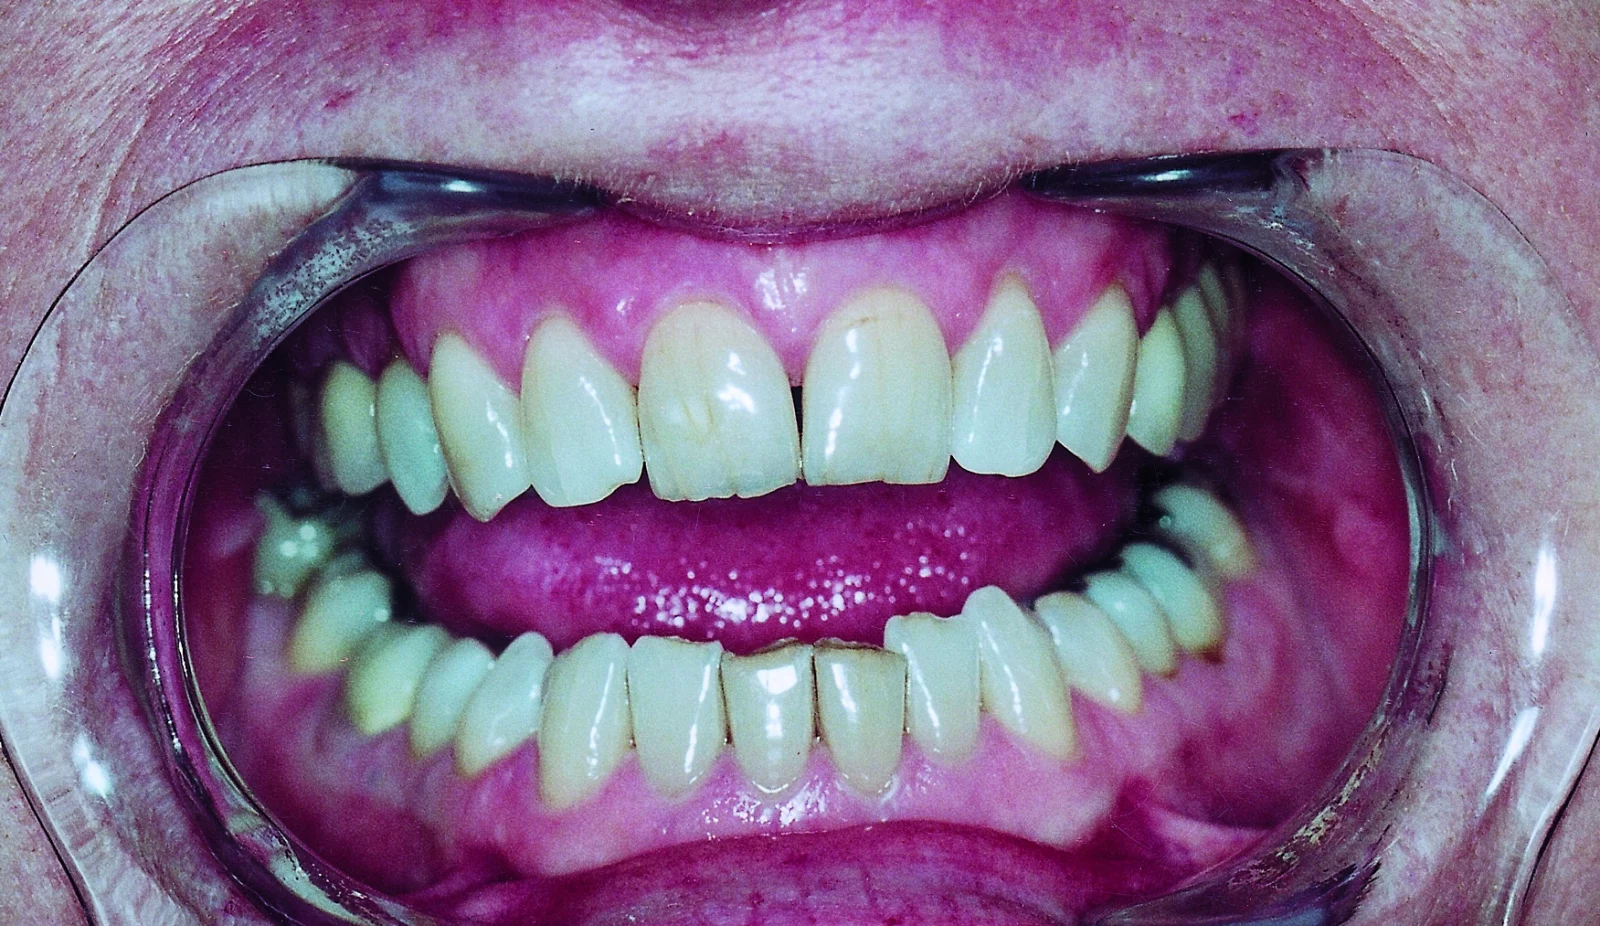 Gums in a persons' mouth.